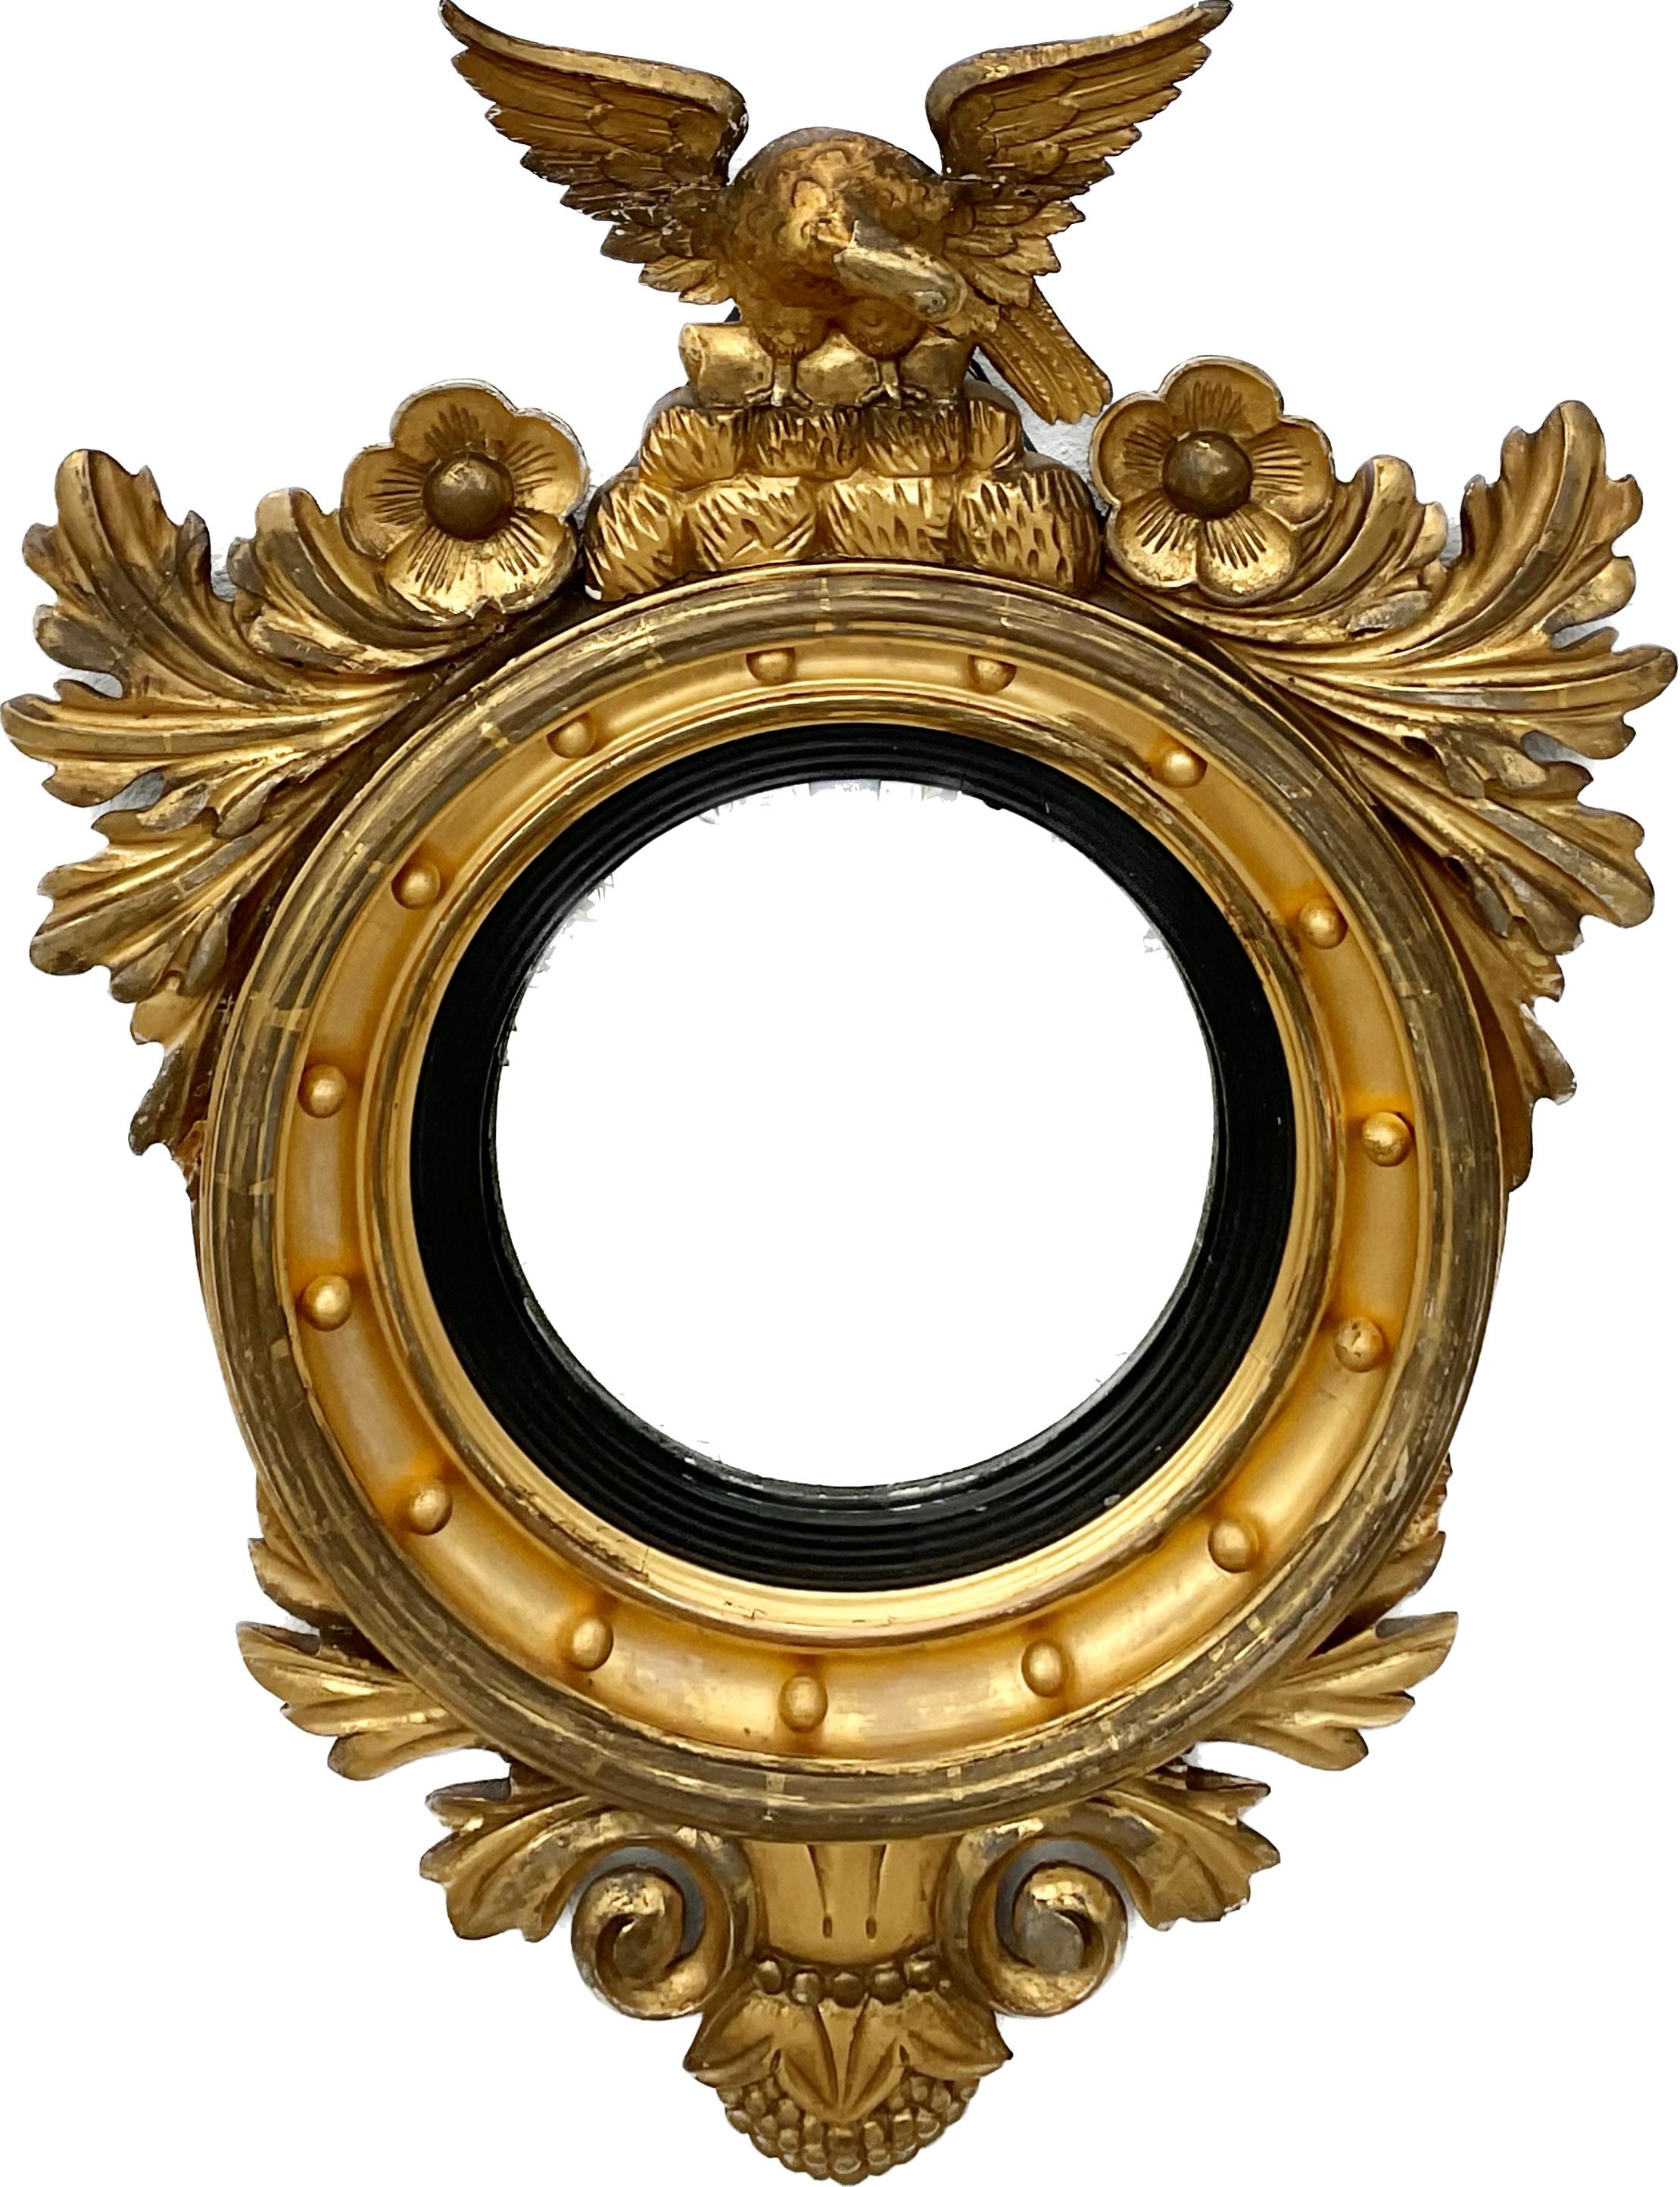 19th Century Federal Eagle Round Gilt Wood Frame Mirror. The frame consists of 15 round balls framed by garlands and flowers with an eagle with wide spread wings atop of frame. 